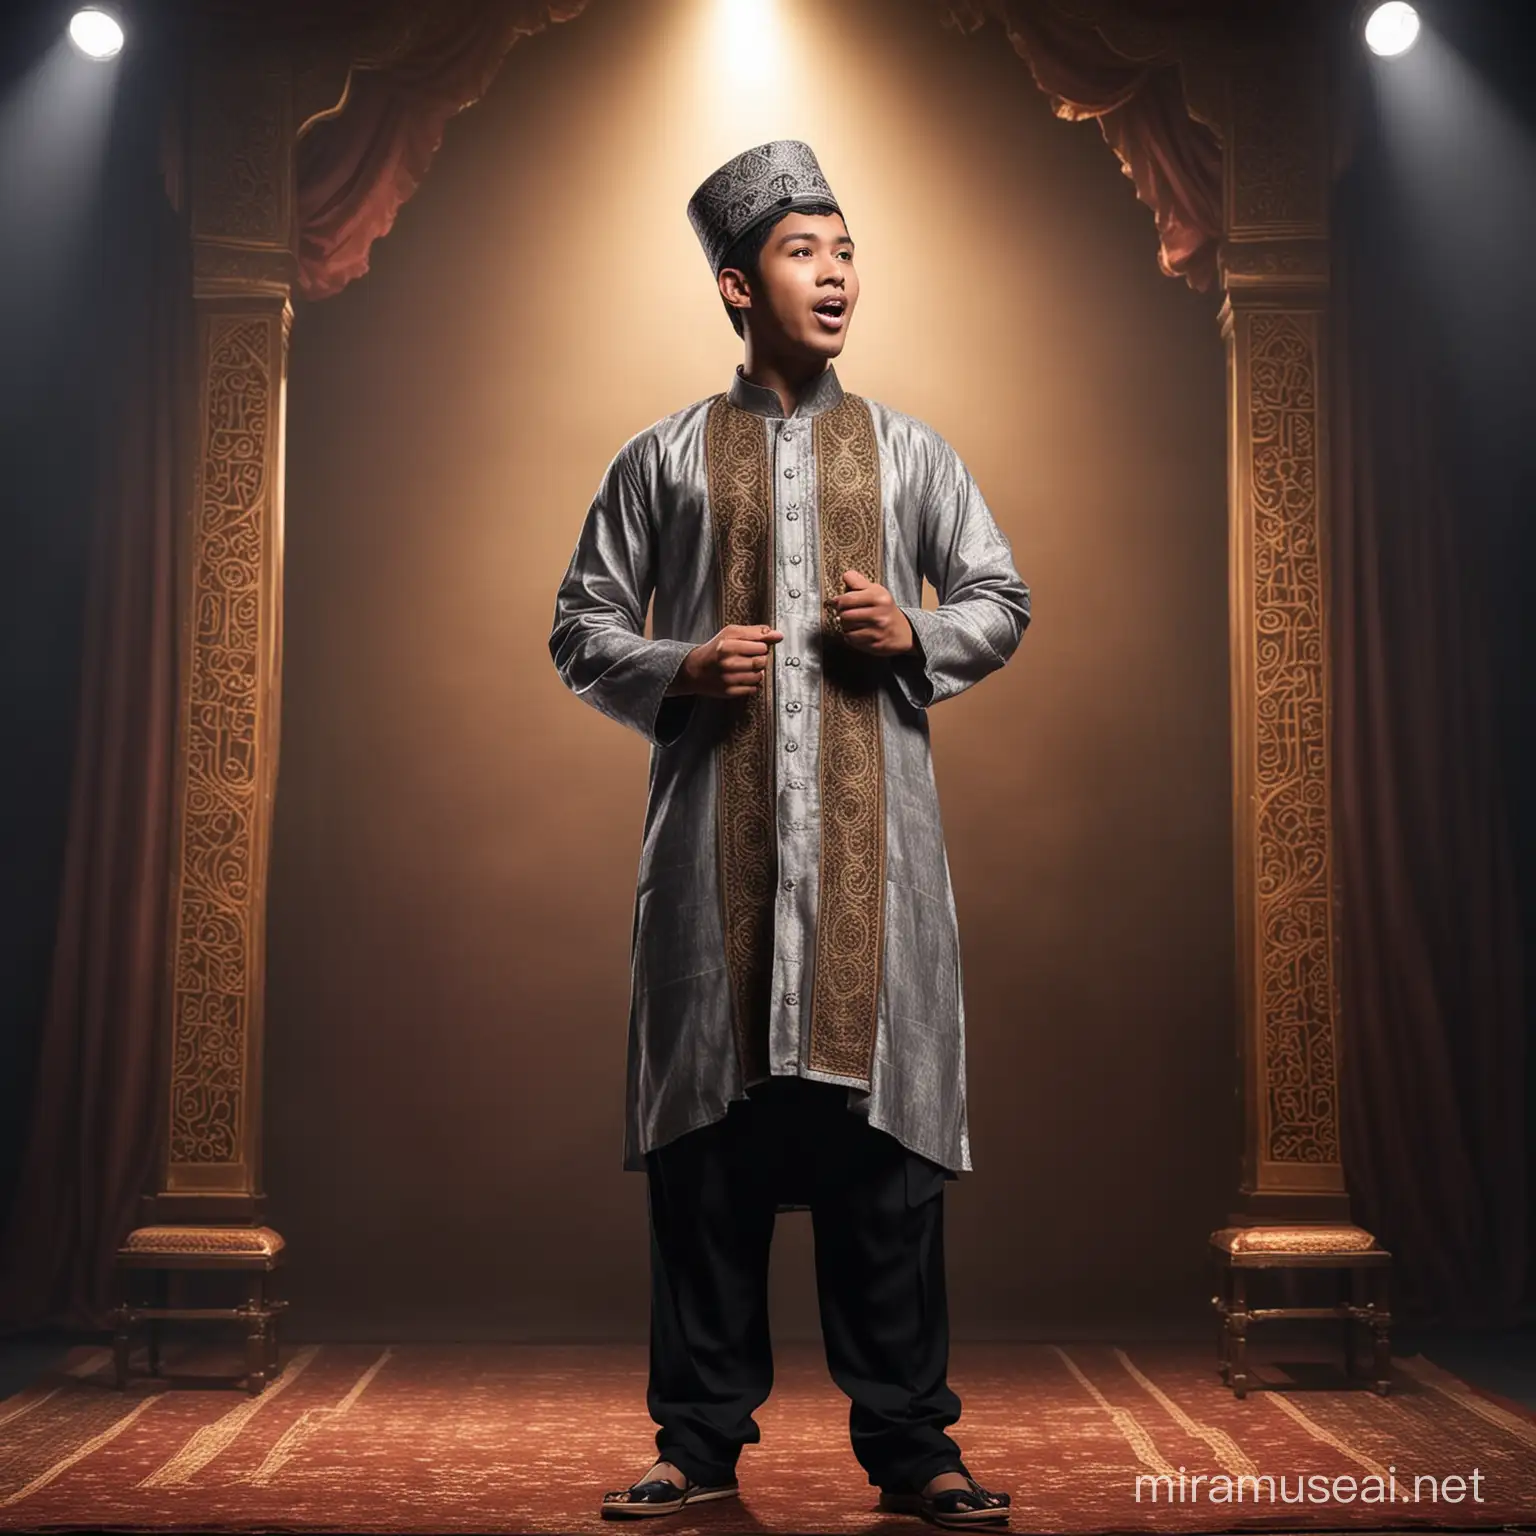 Indonesian Muslim Singer Performing on Magnificent Stage